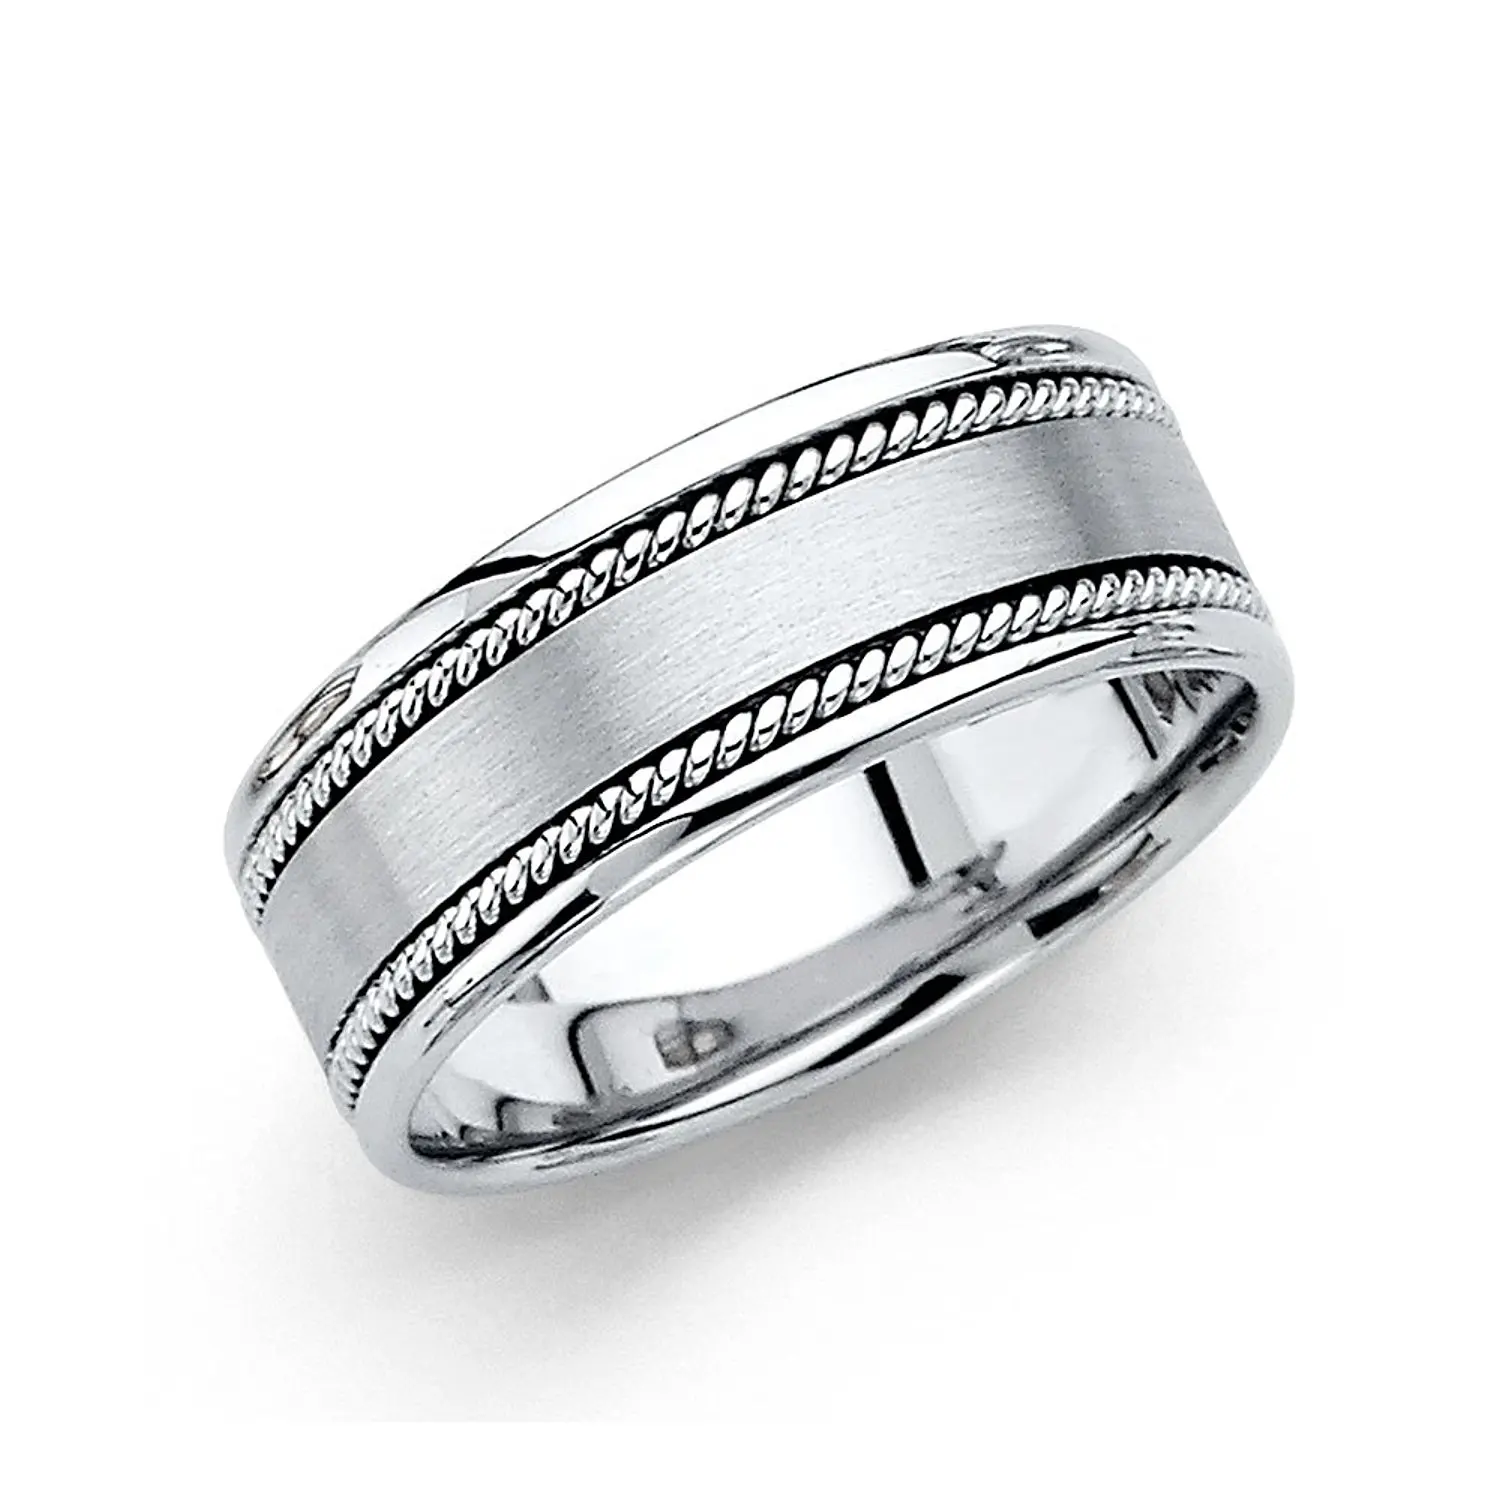 Cheap Mens Wedding Band Sale Find Mens Wedding Band Sale Deals On